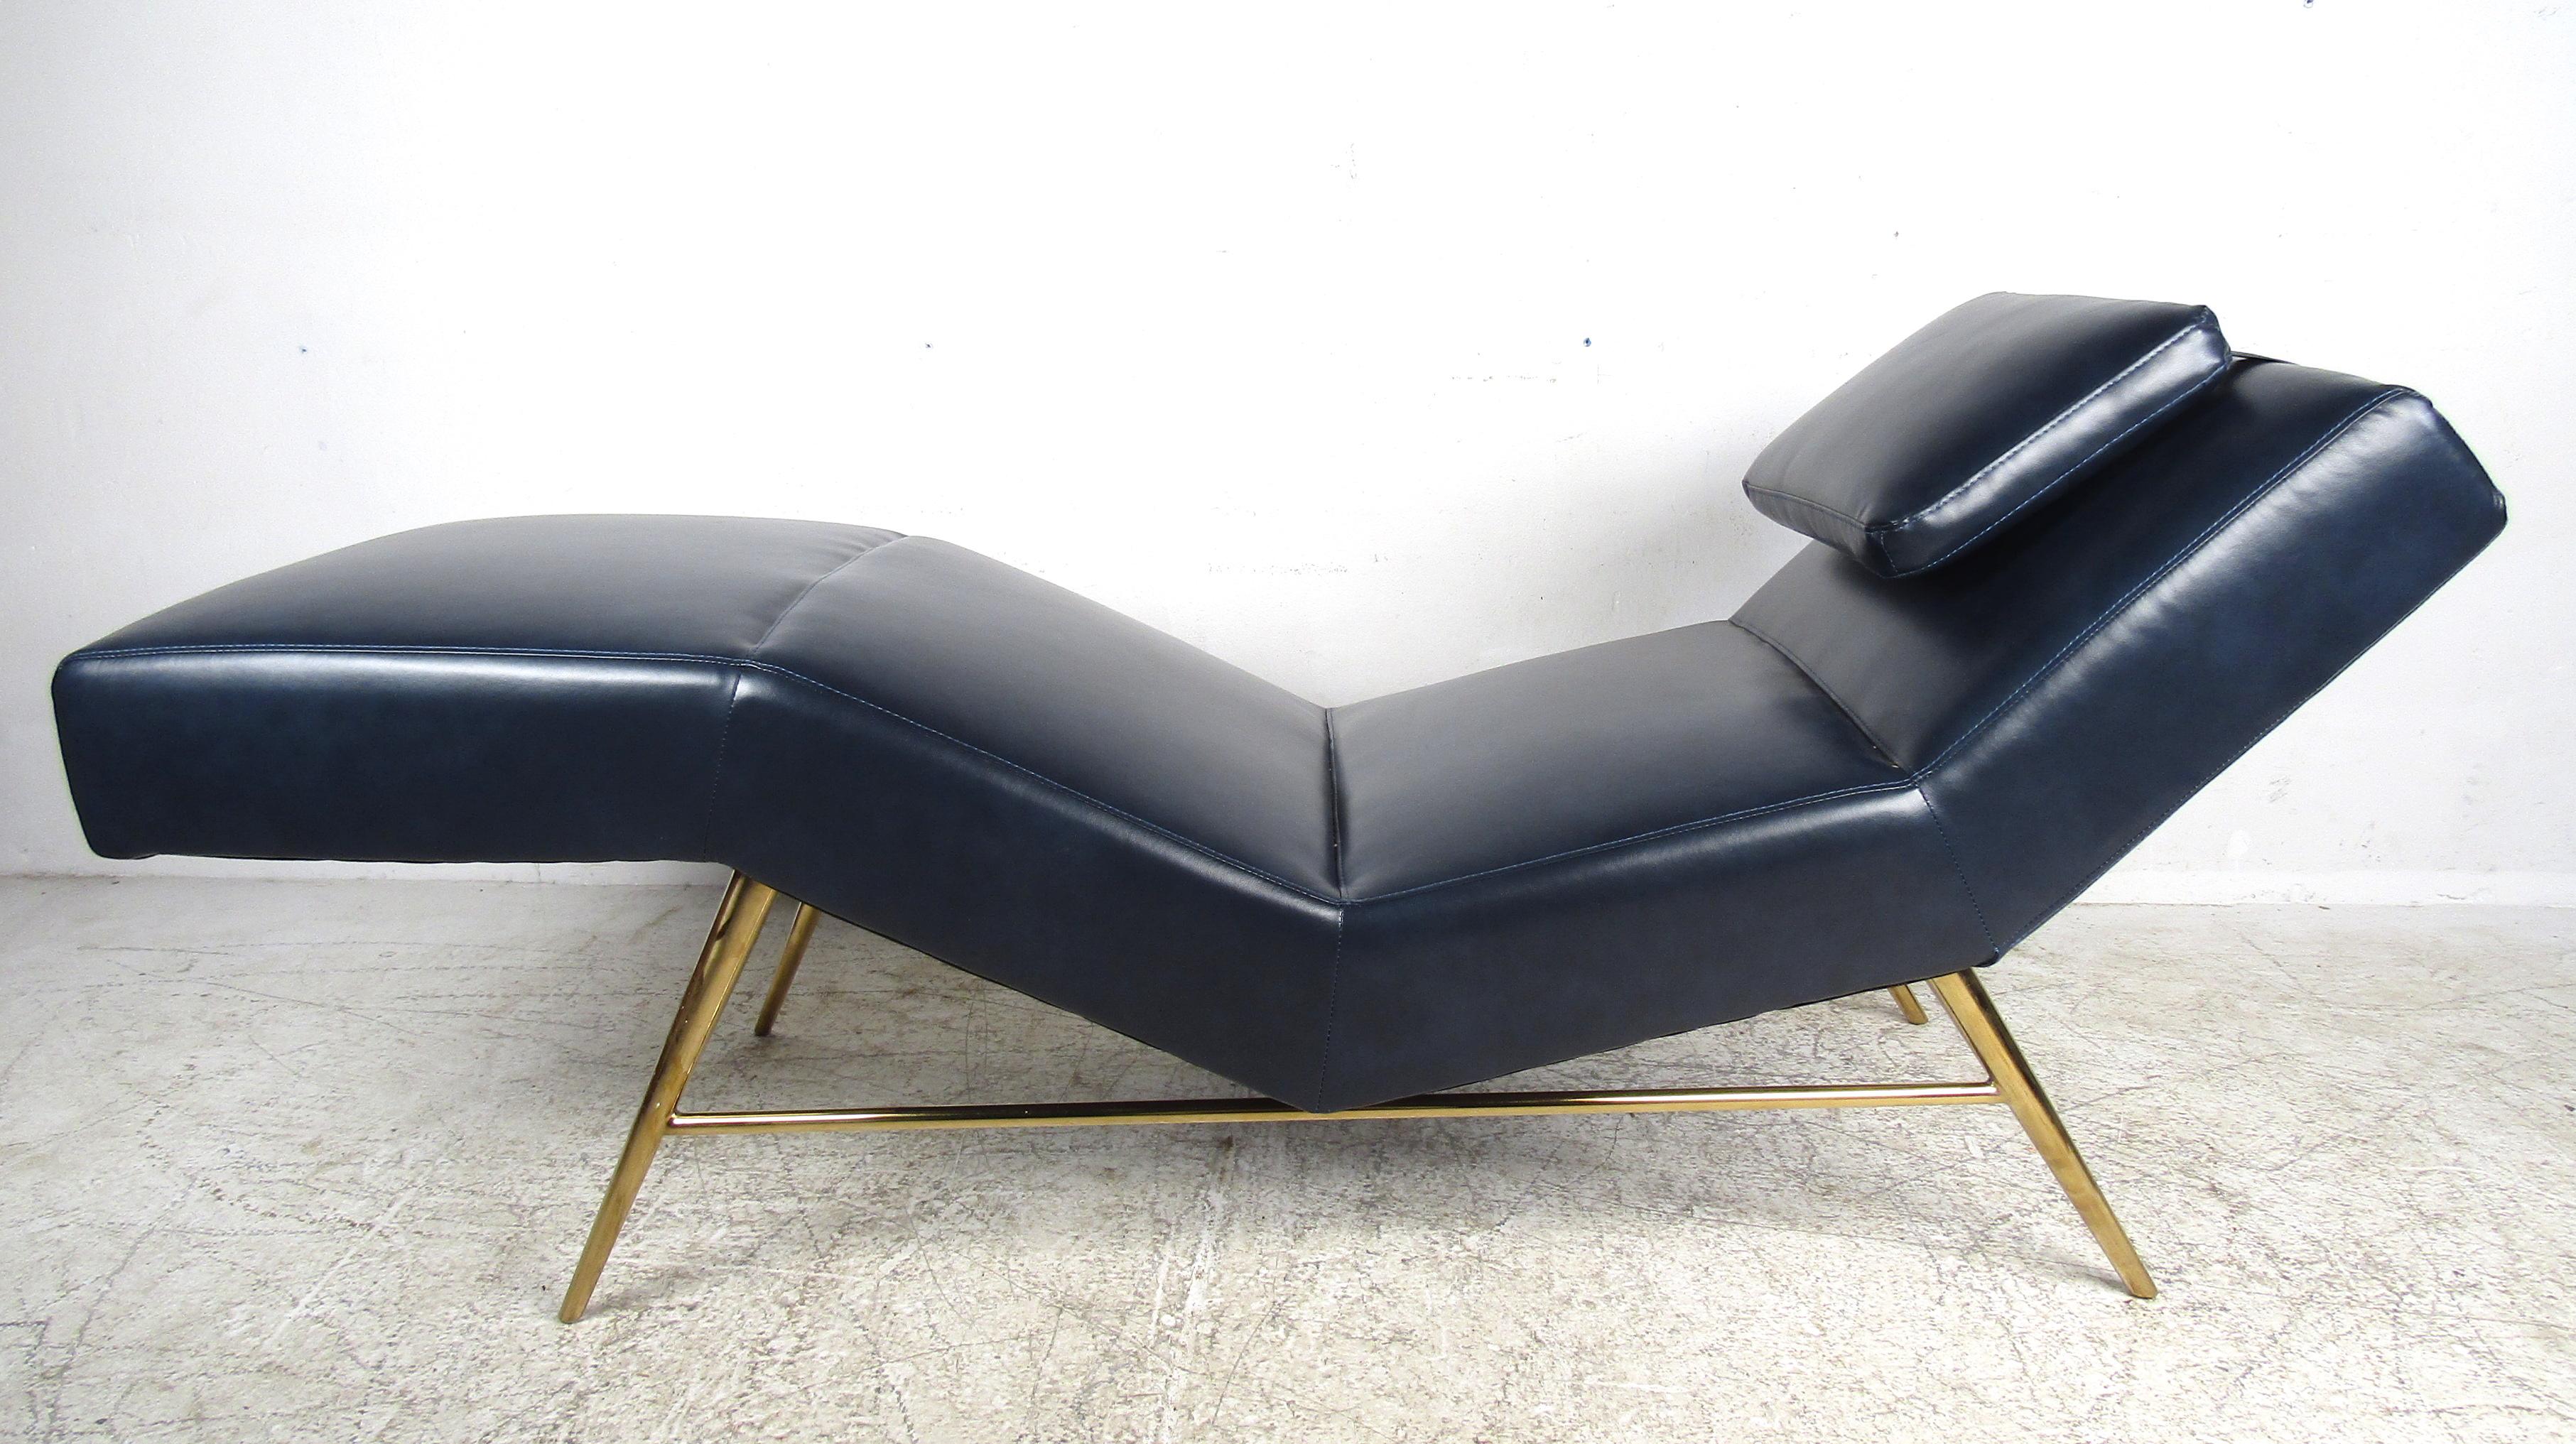 This stunning midcentury style Italian daybed features an overstuffed pillow for your head and perfectly placed contours for the body. This lounge chair offers optimal comfort without sacrificing style. The unusual brass frame with splayed legs and